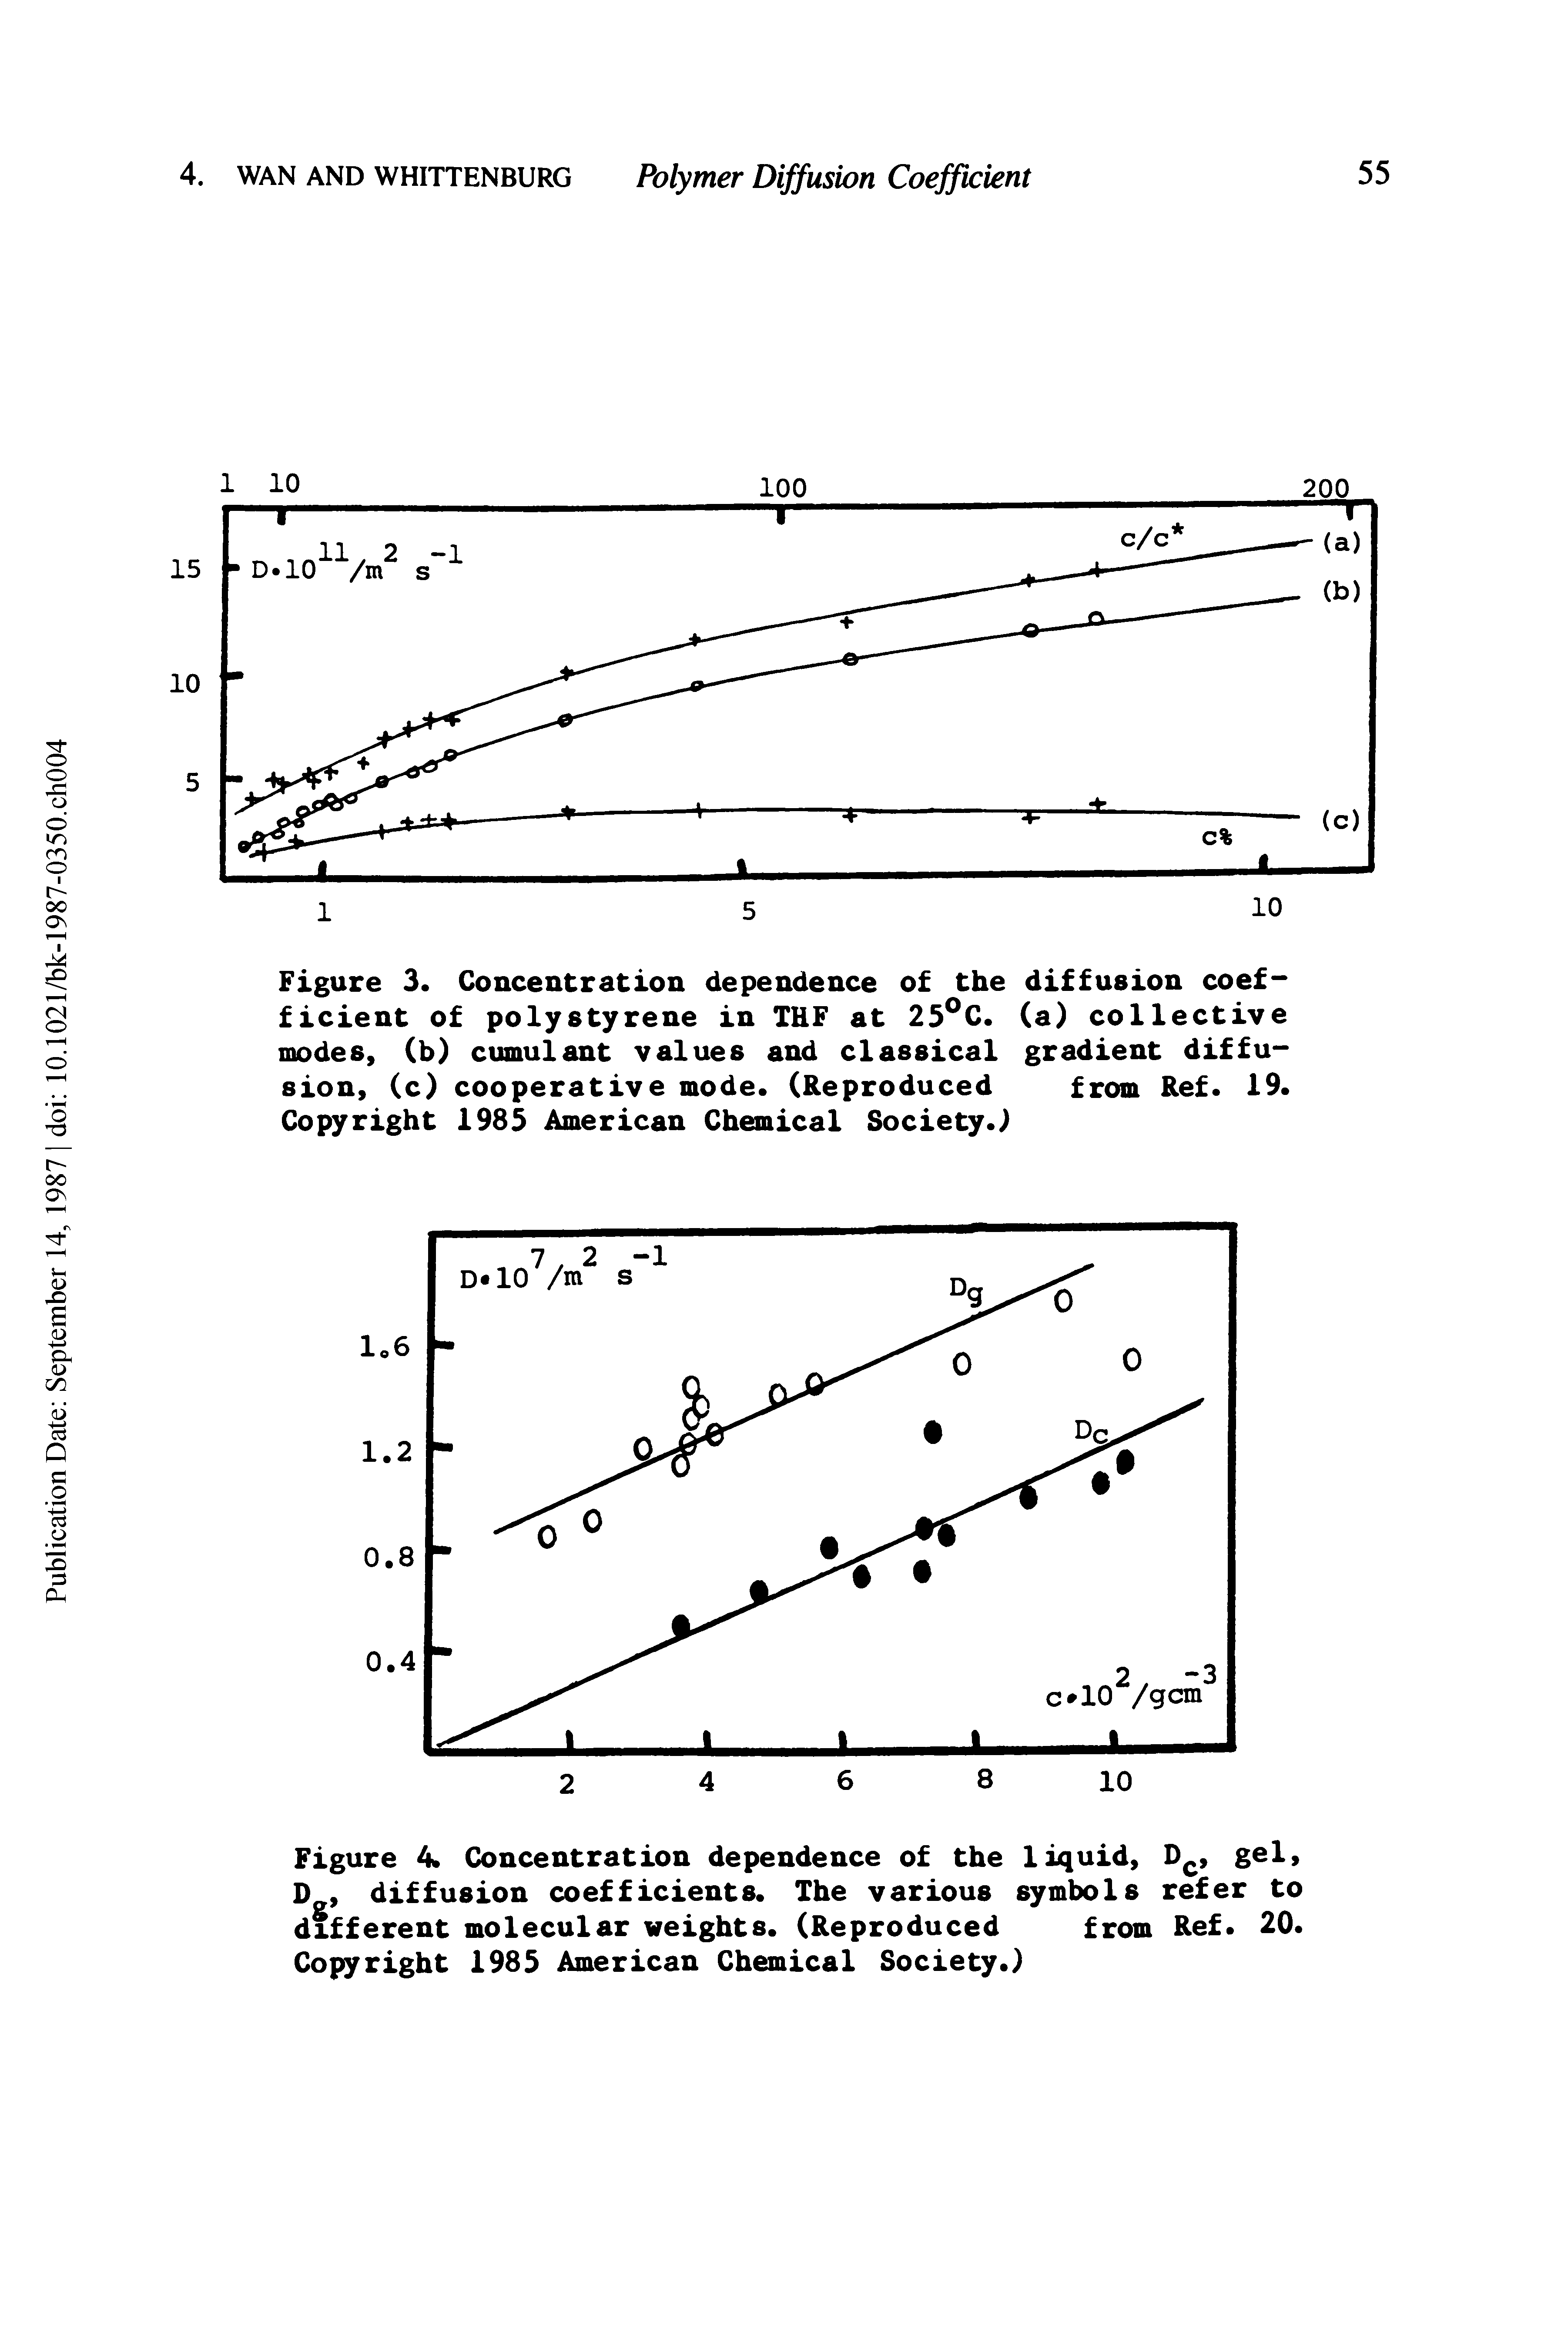 Figure 3. Concentration dependence of the diffusion coefficient of polystyrene in THF at 23 C. (a) collective modes, (b) cumulant values and classical gradient diffusion, (c) cooperative mode. (Reproduced from Ref. 19. Copyright 1985 American Chemical Society. ...